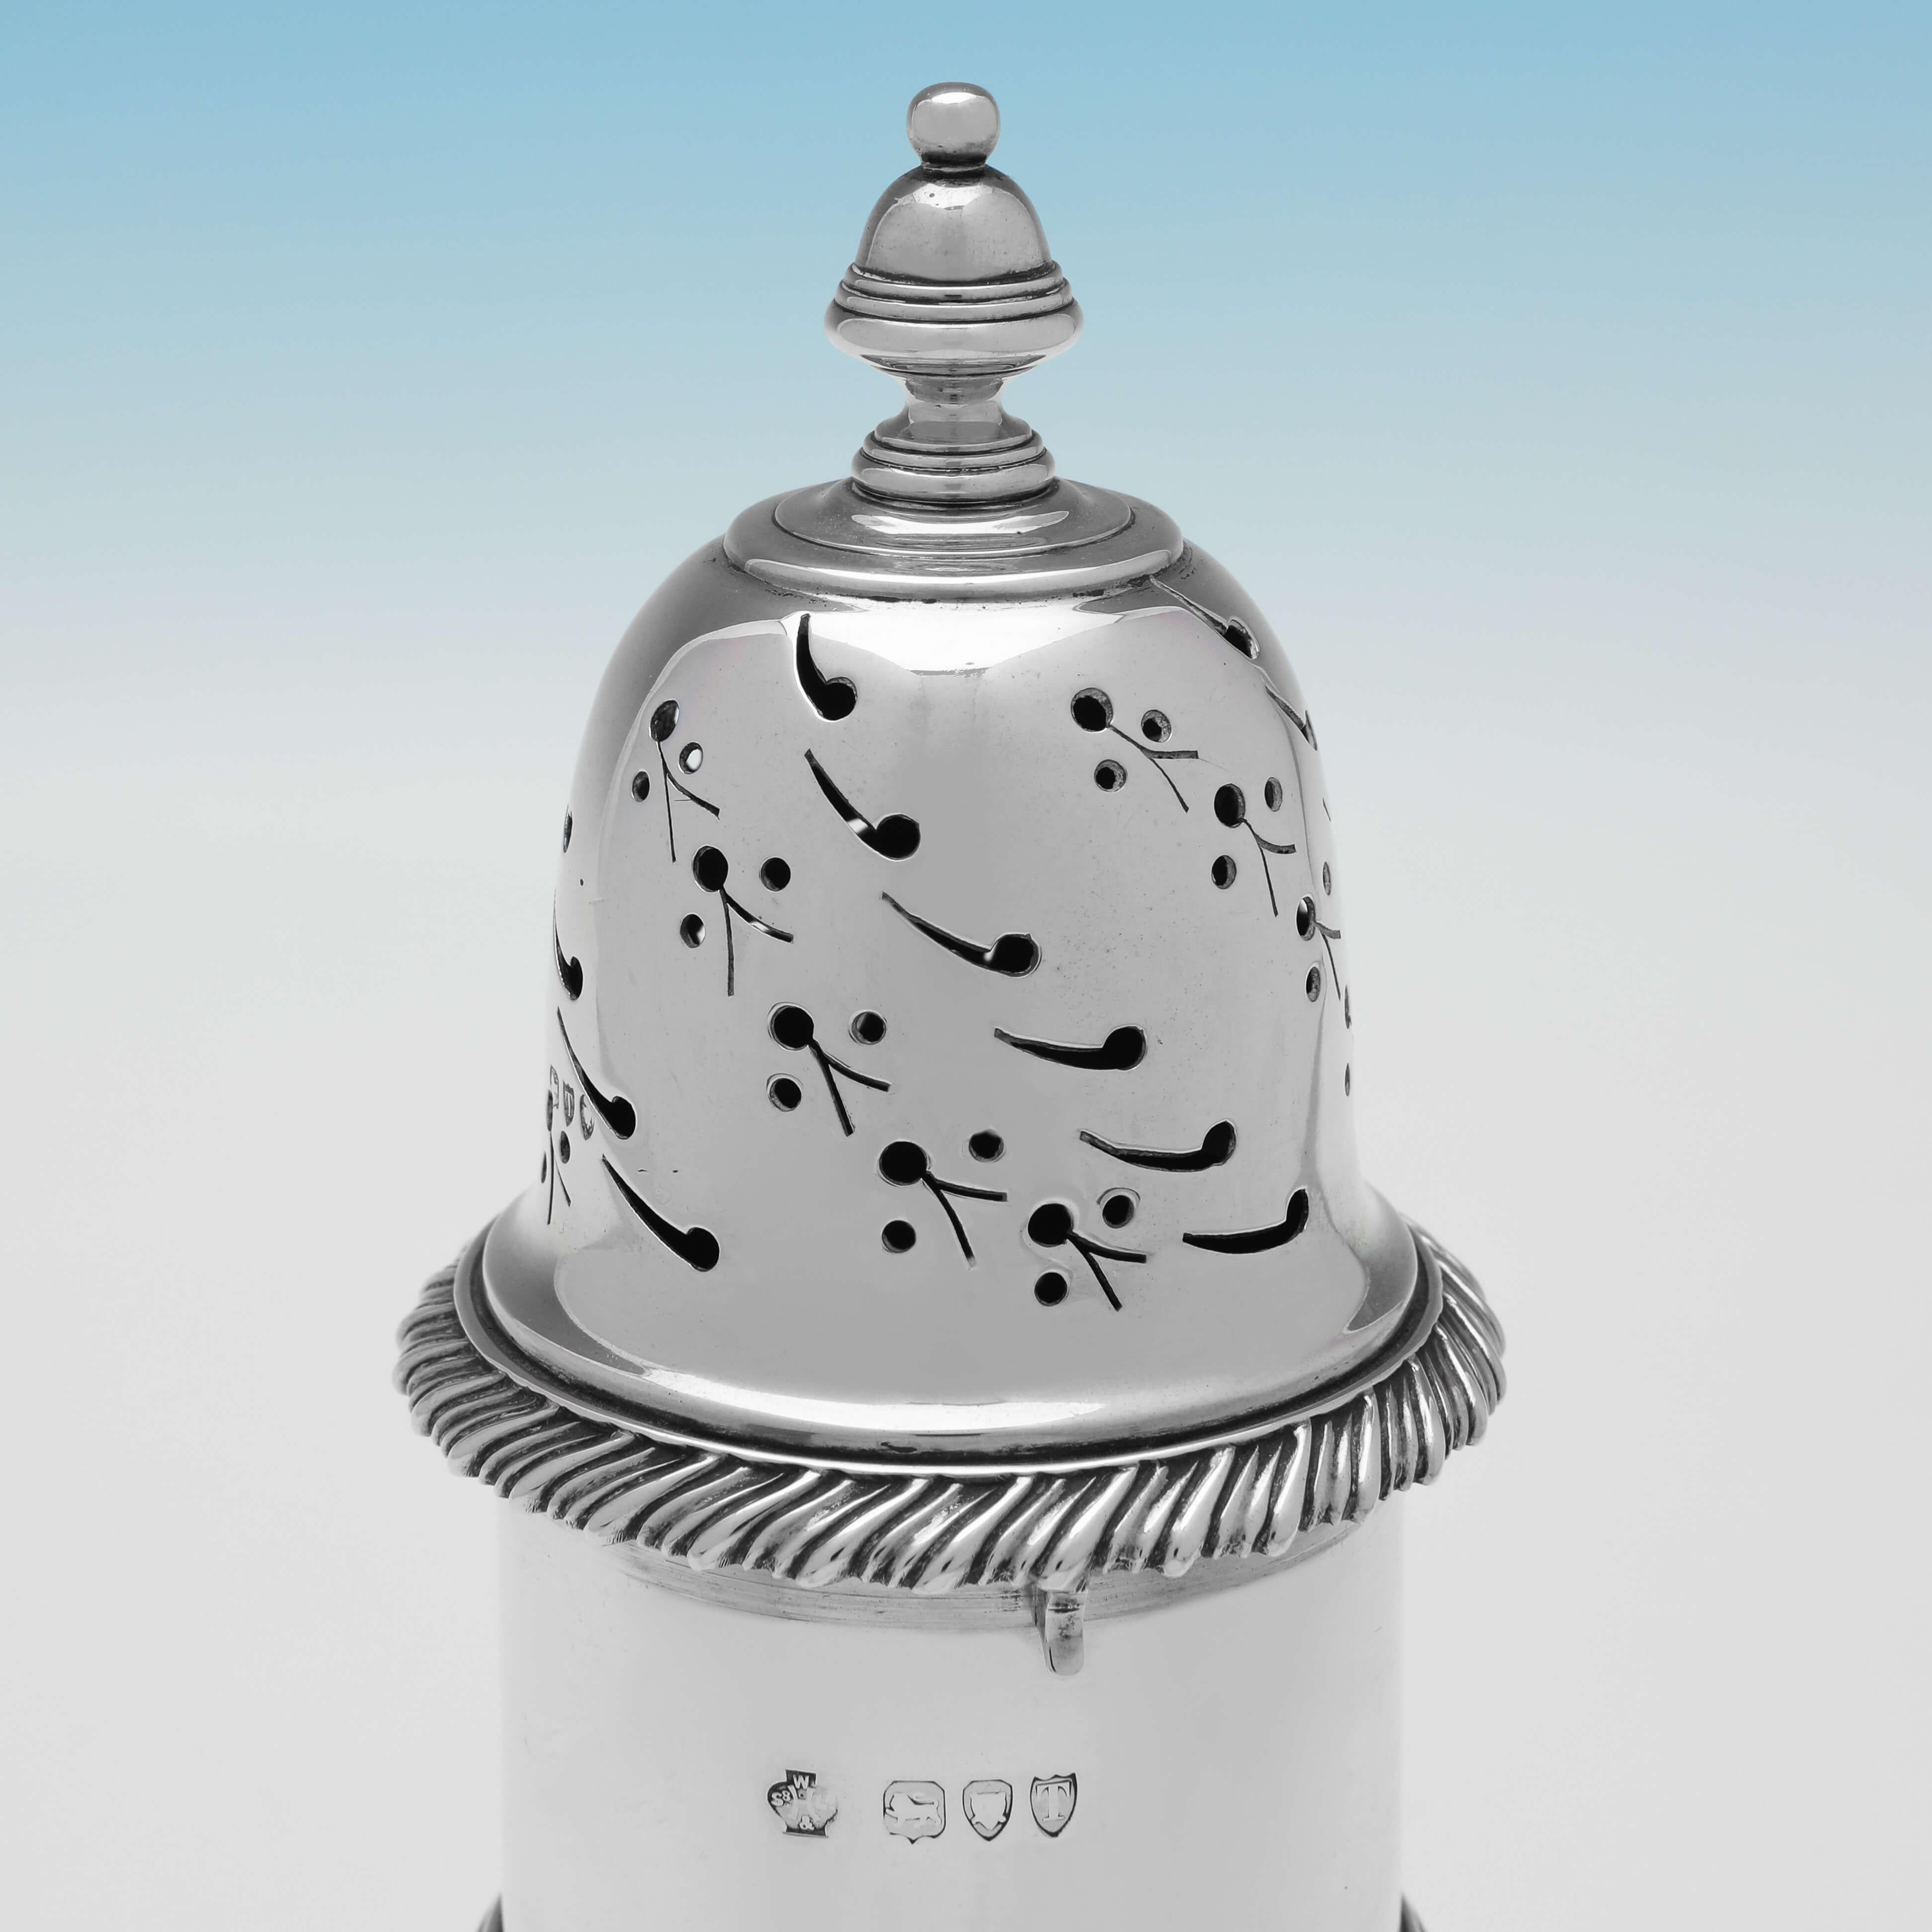 Hallmarked in London in 1894 by William Hutton & Sons, this handsome, Victorian, Antique Sterling Silver Sugar Caster, is in the traditional 'Lighthouse' form. The sugar caster measures 7.5